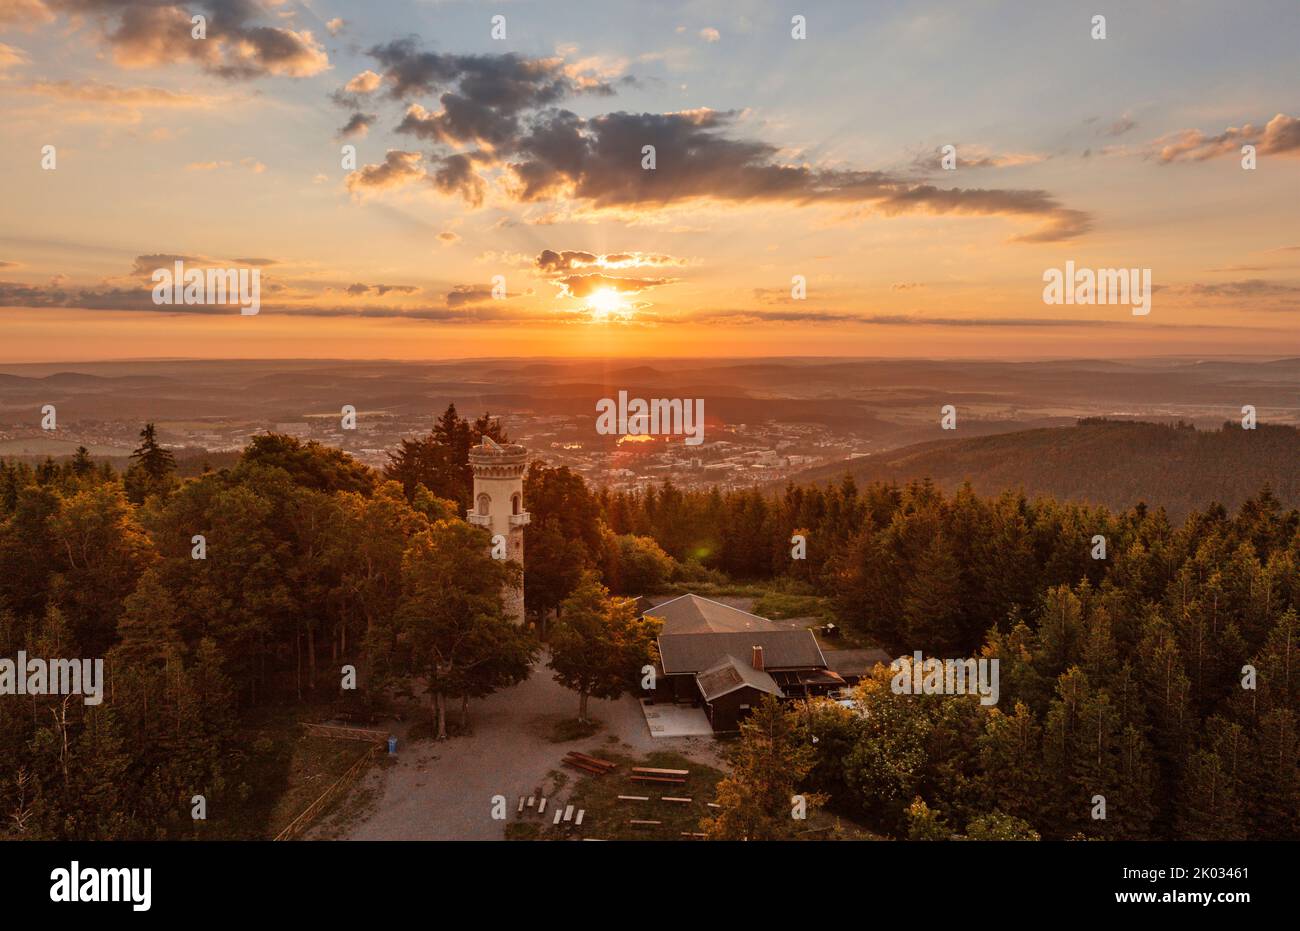 Germany, Thuringia, Ilmenau, Kickelhahn, observation tower, restaurant, rest area, city (background), forest, mountains, sunrise, overview Stock Photo